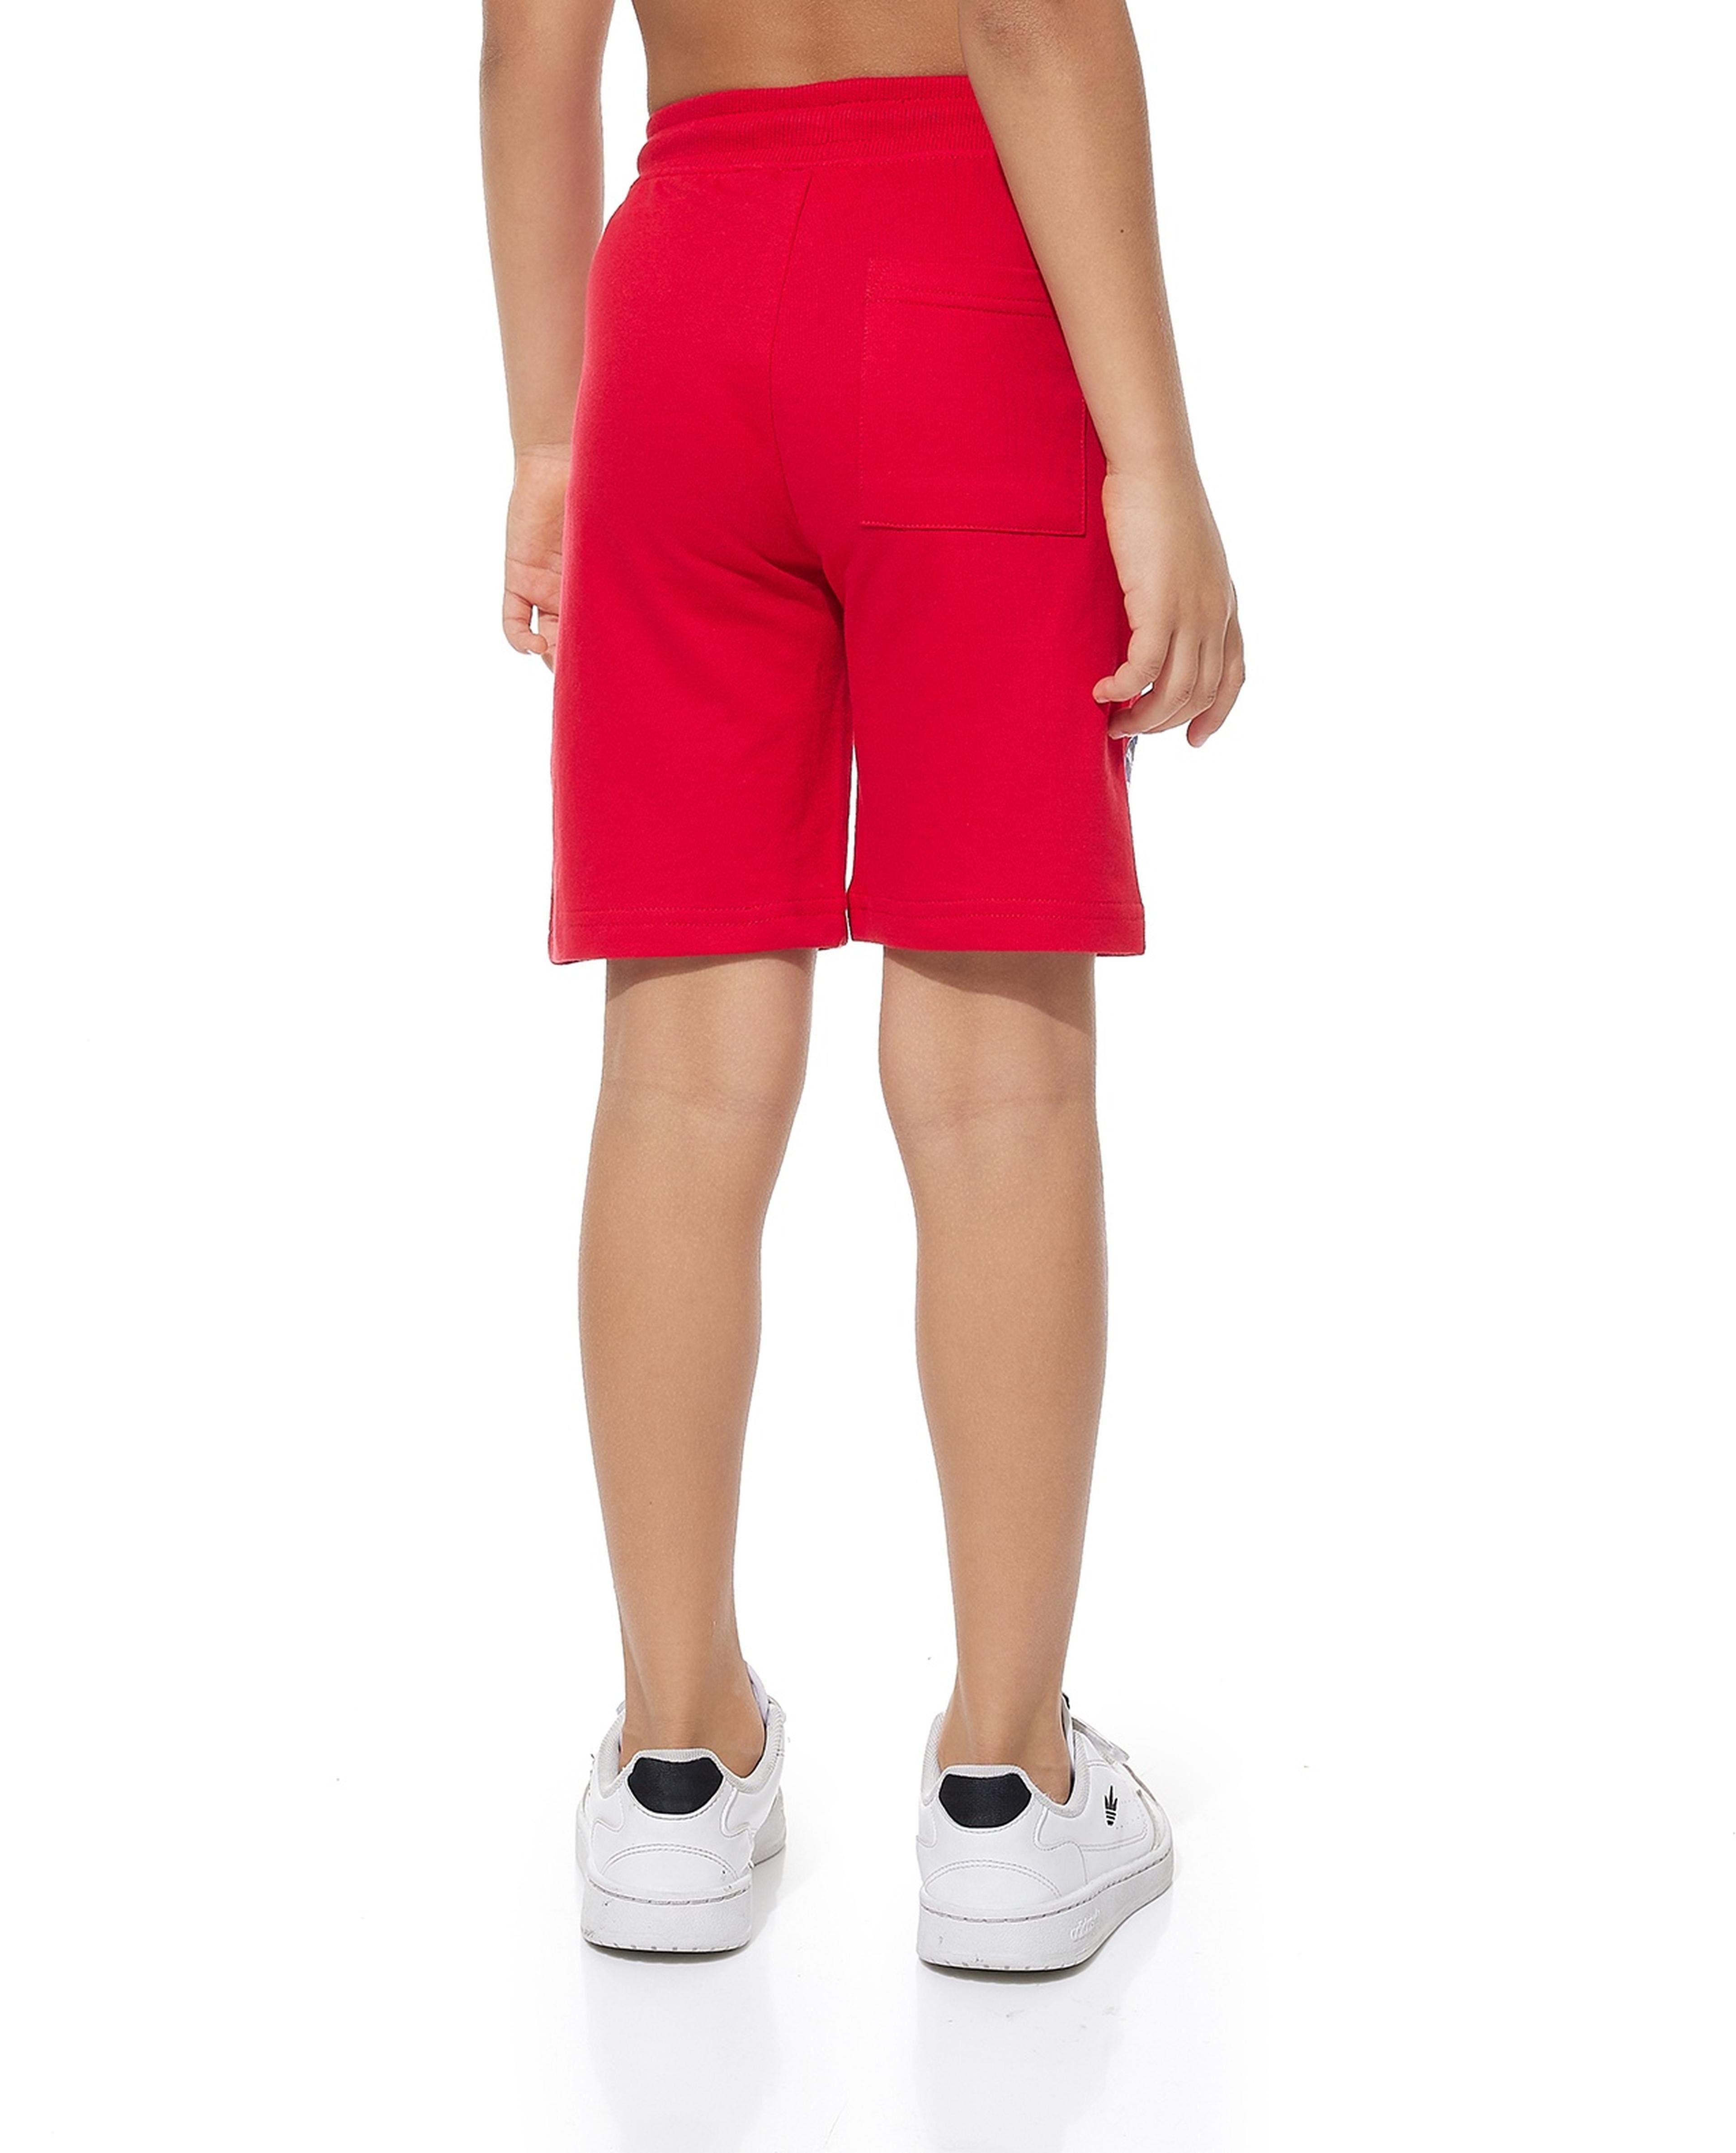 Spider-Man Print Knitted Shorts with Drawstring Waist